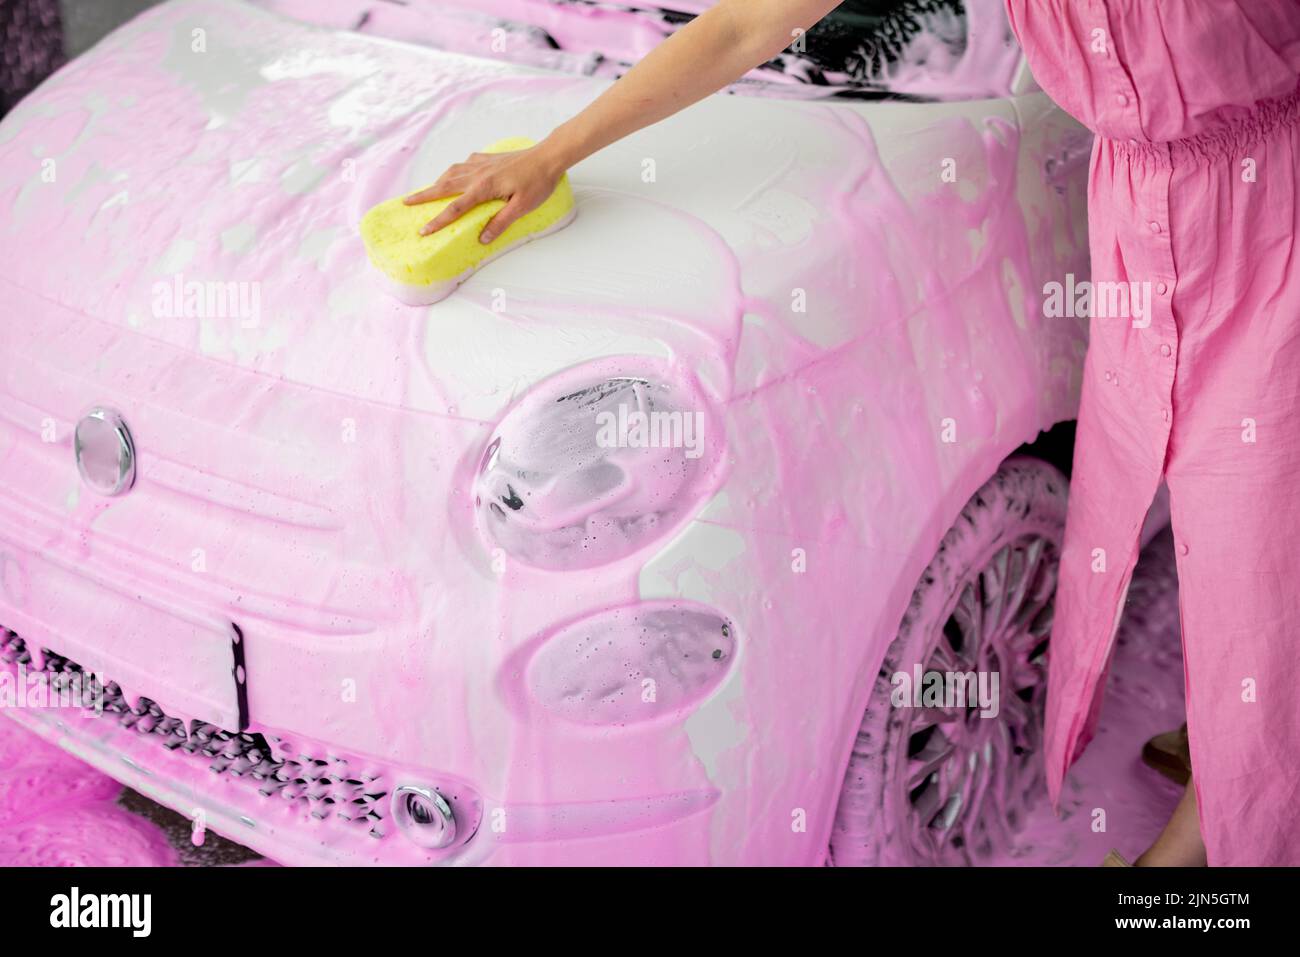 Female person wiping car covered in pink nano foam with yellow sponge at car wash. Close-up view on car hood Stock Photo